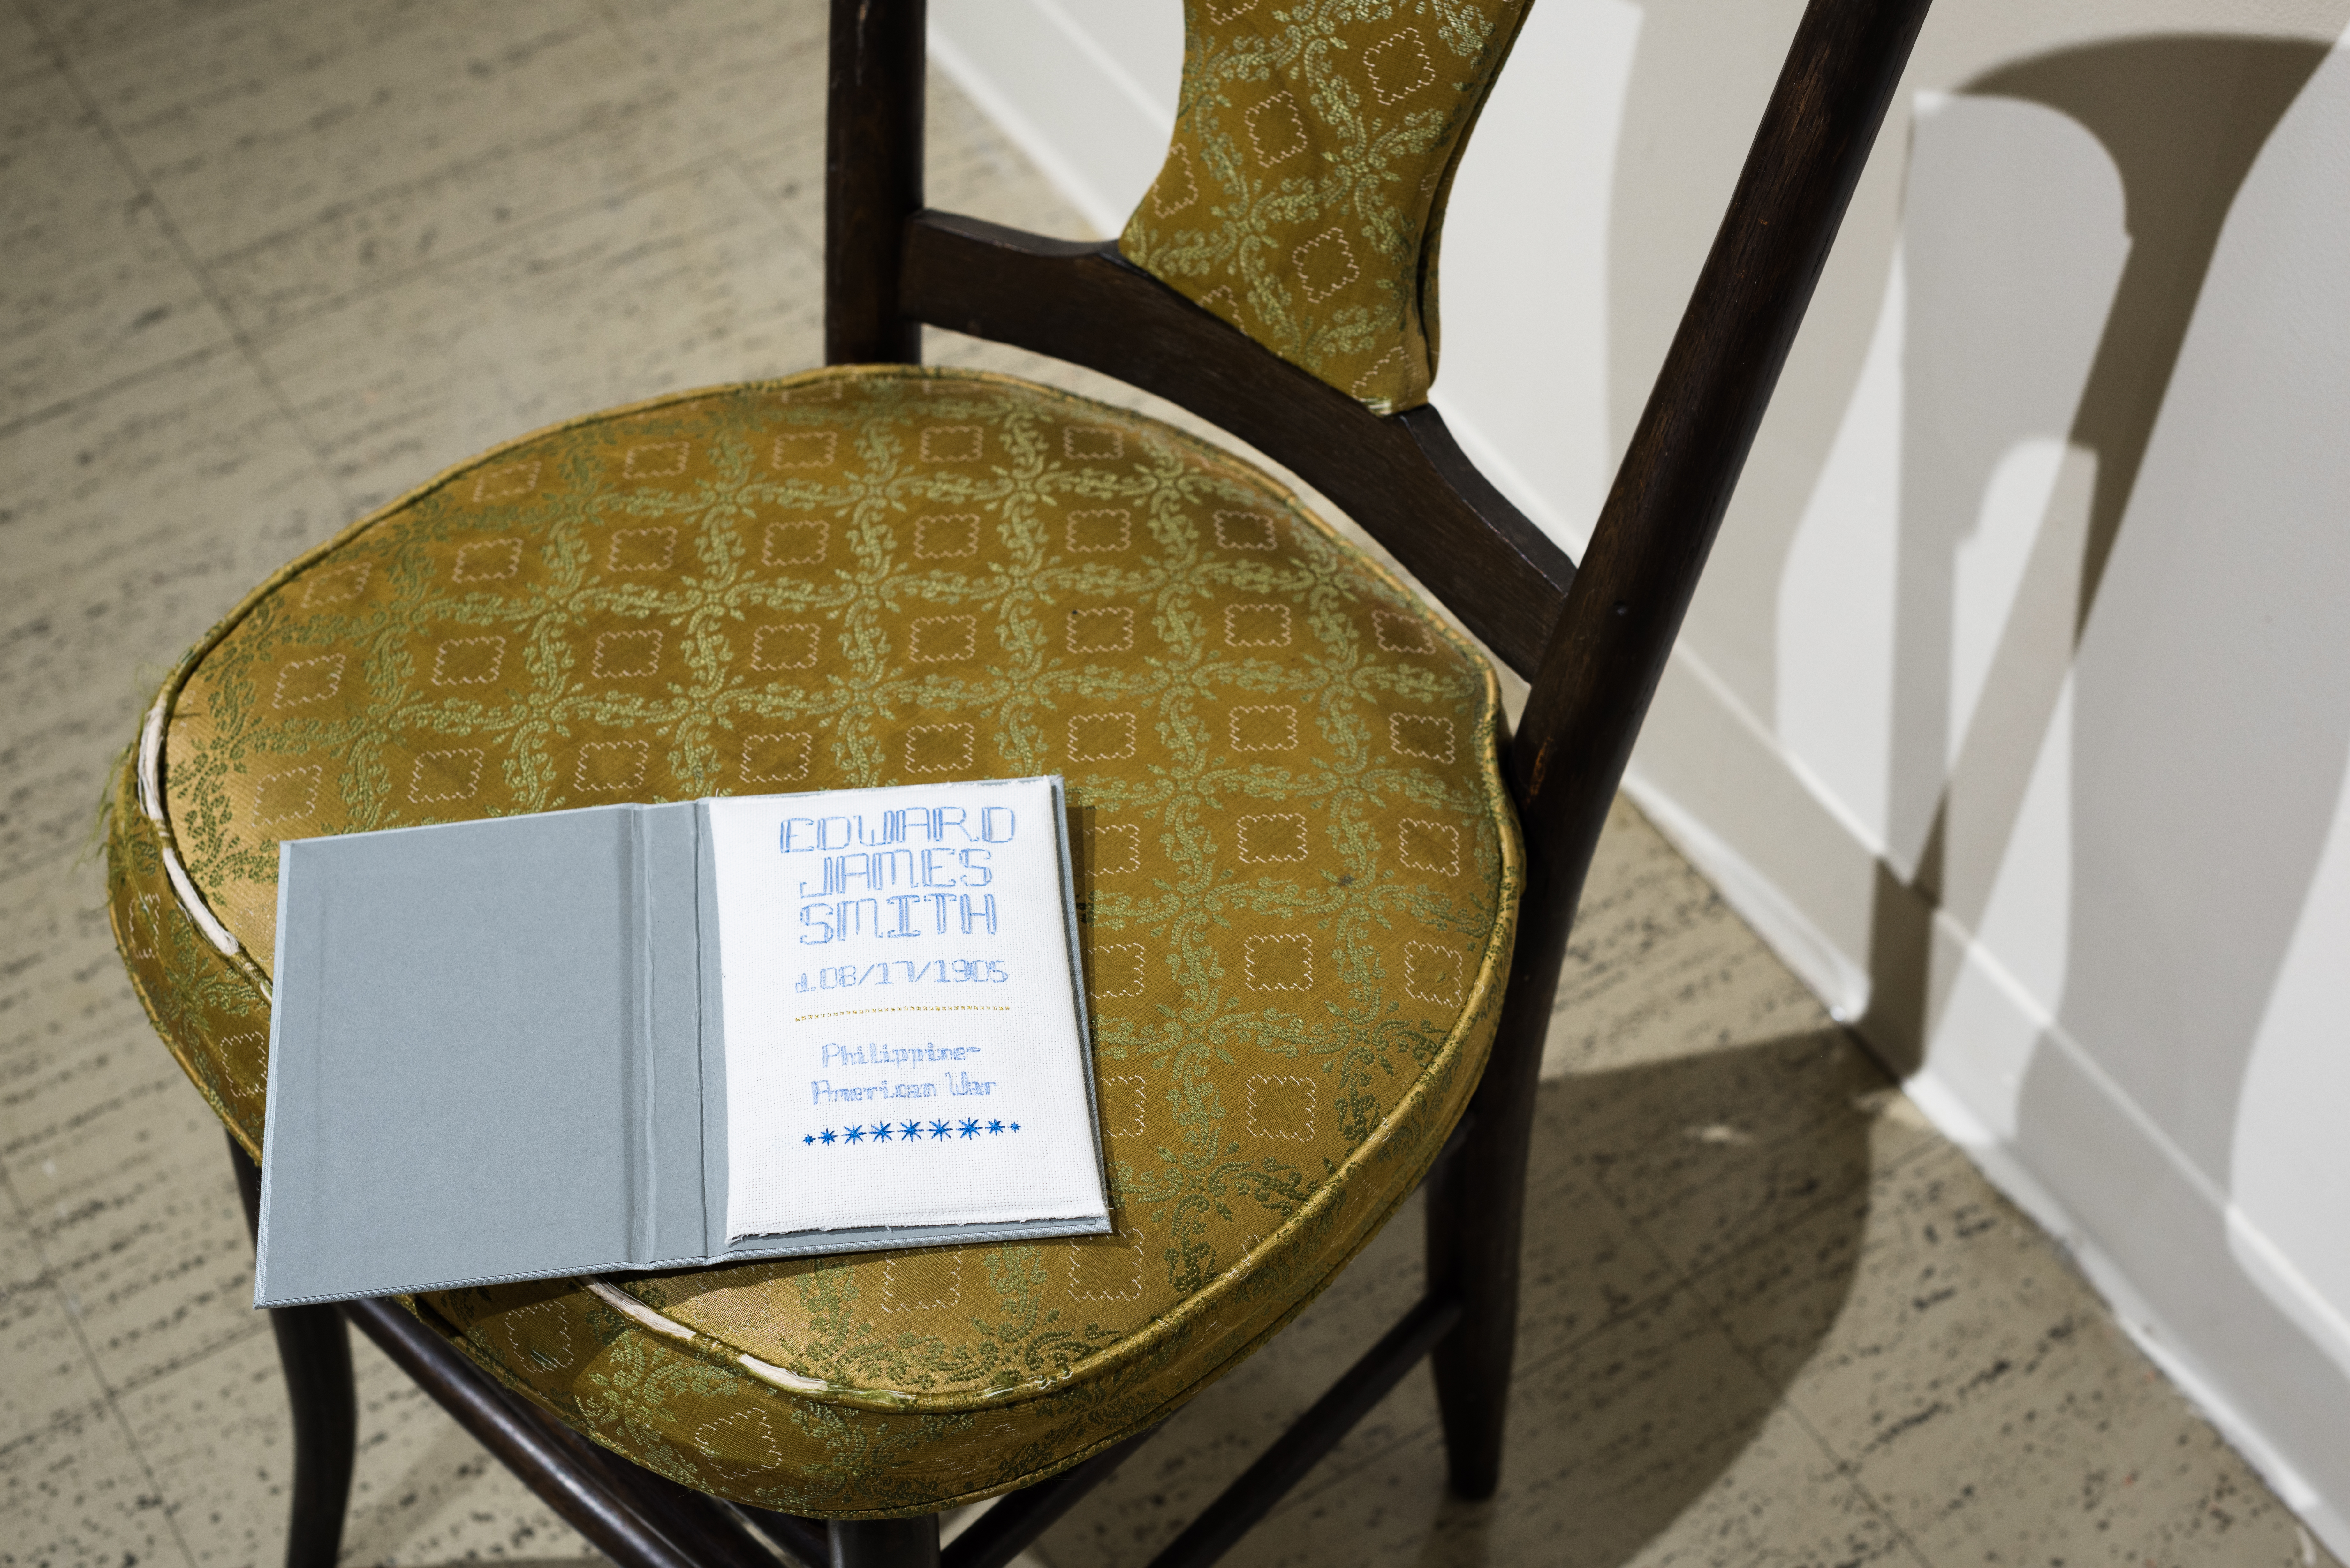 Image: Becky Alley, Epitaphs for Edwards, 2016, 220 artists books each with a hand-stitched epitaph inside. A detail shot of the installation showing one wooden chair with a gold-colored cushion. Sitting on the chair is a light blue book open so that you can see the first page, which reads: "COWARD JAMES SMITH". Image courtesy of the artist.